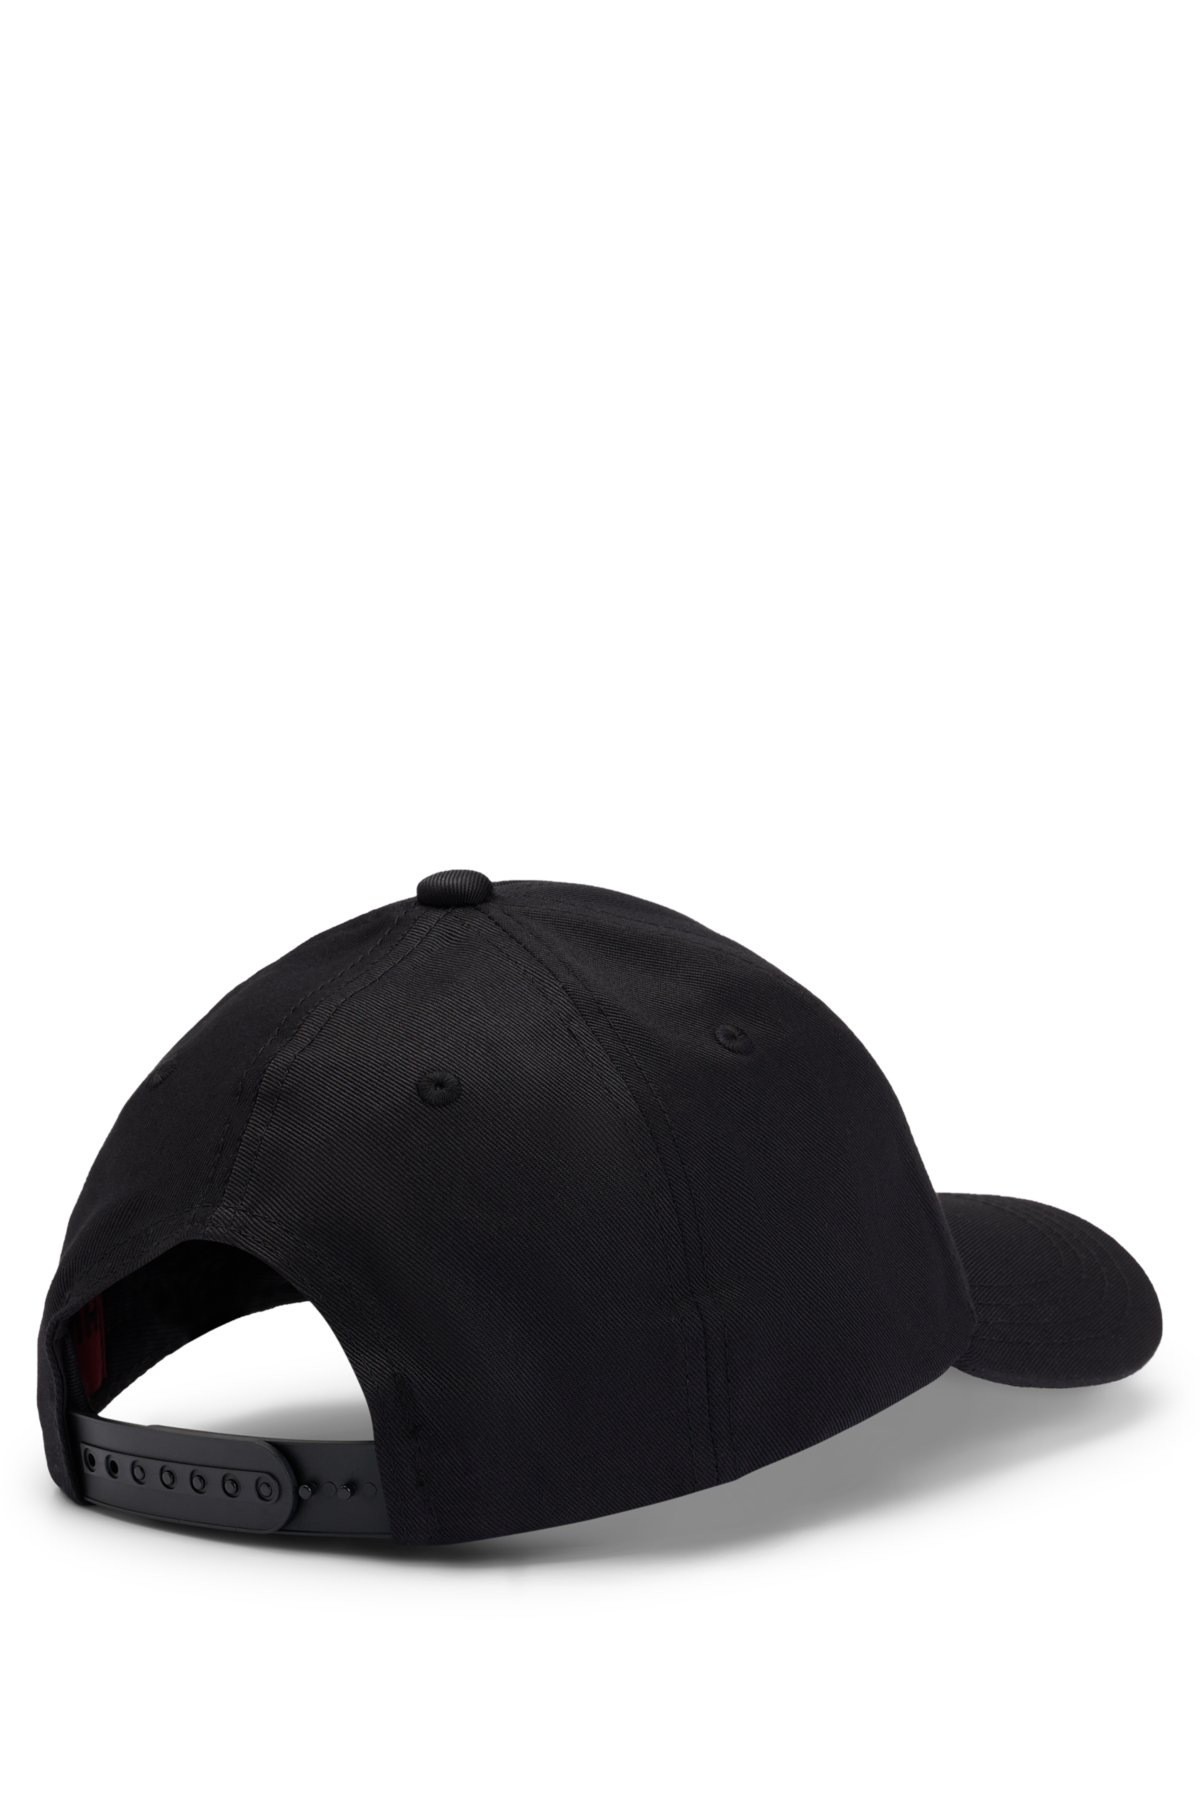 Cotton-twill cap with embroidered logo and snap closure, Black